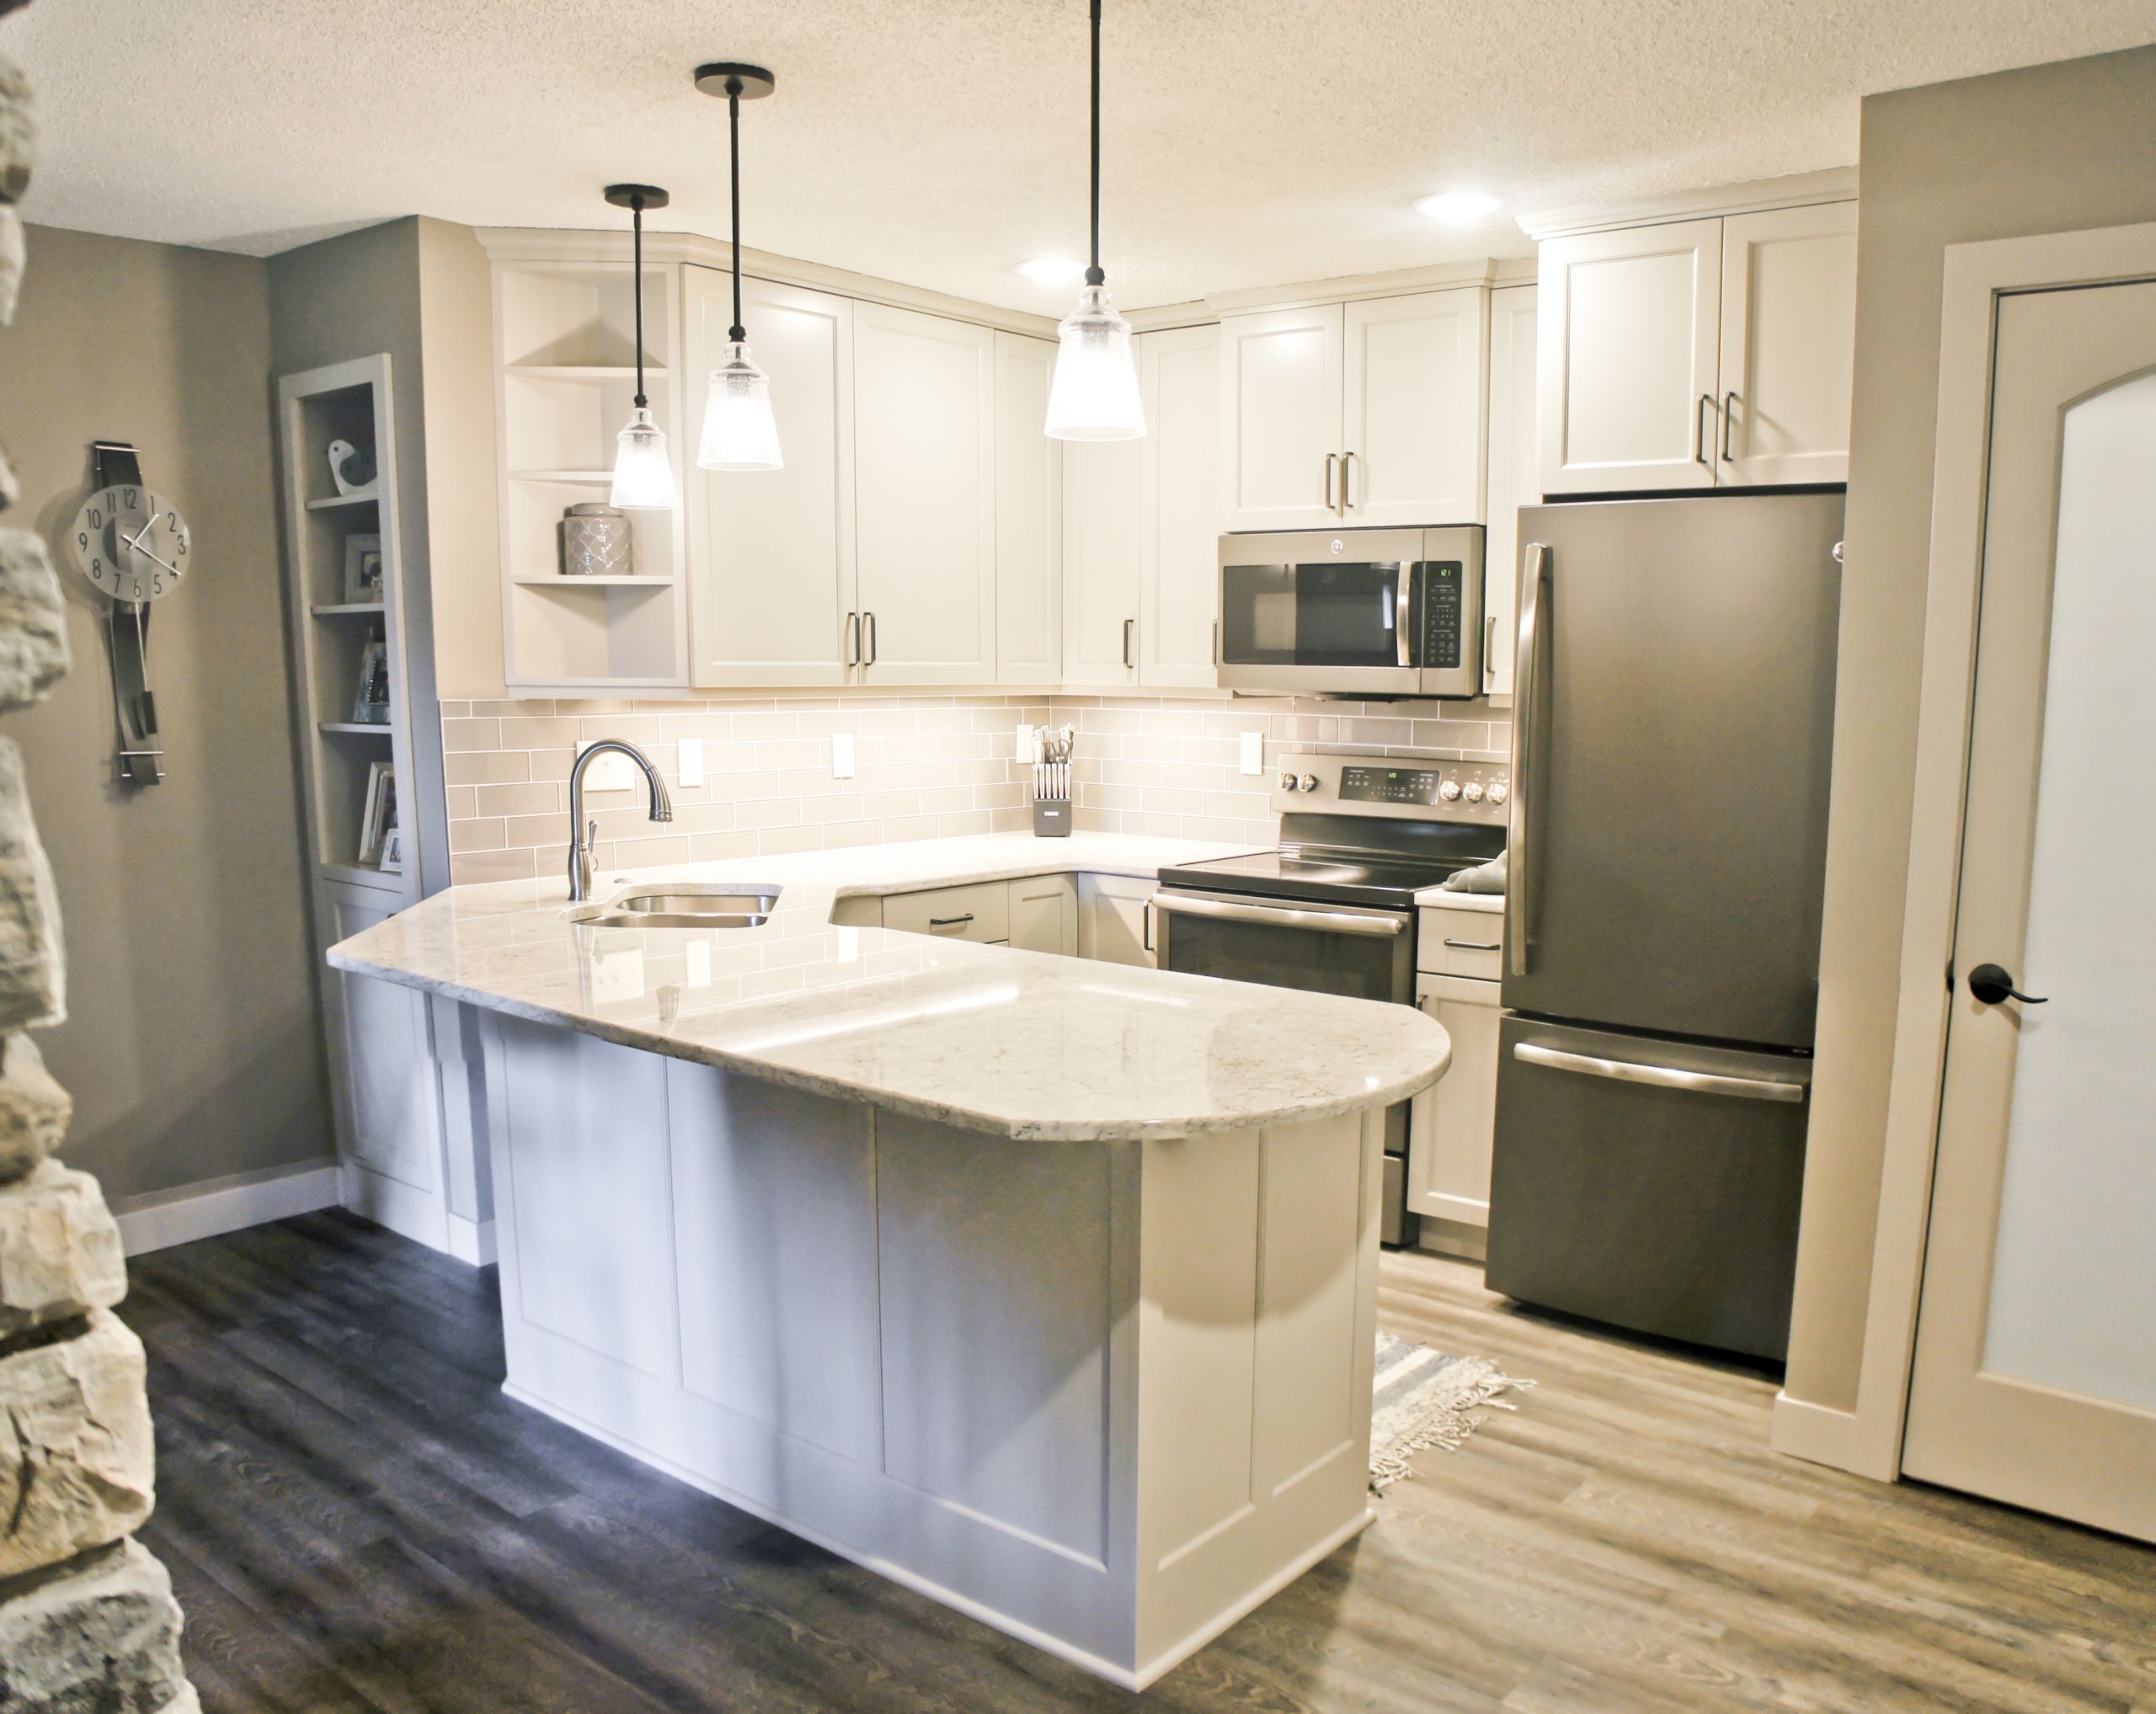 Optimizing Small Kitchen Spaces with Crystal Cabinets   Western ...